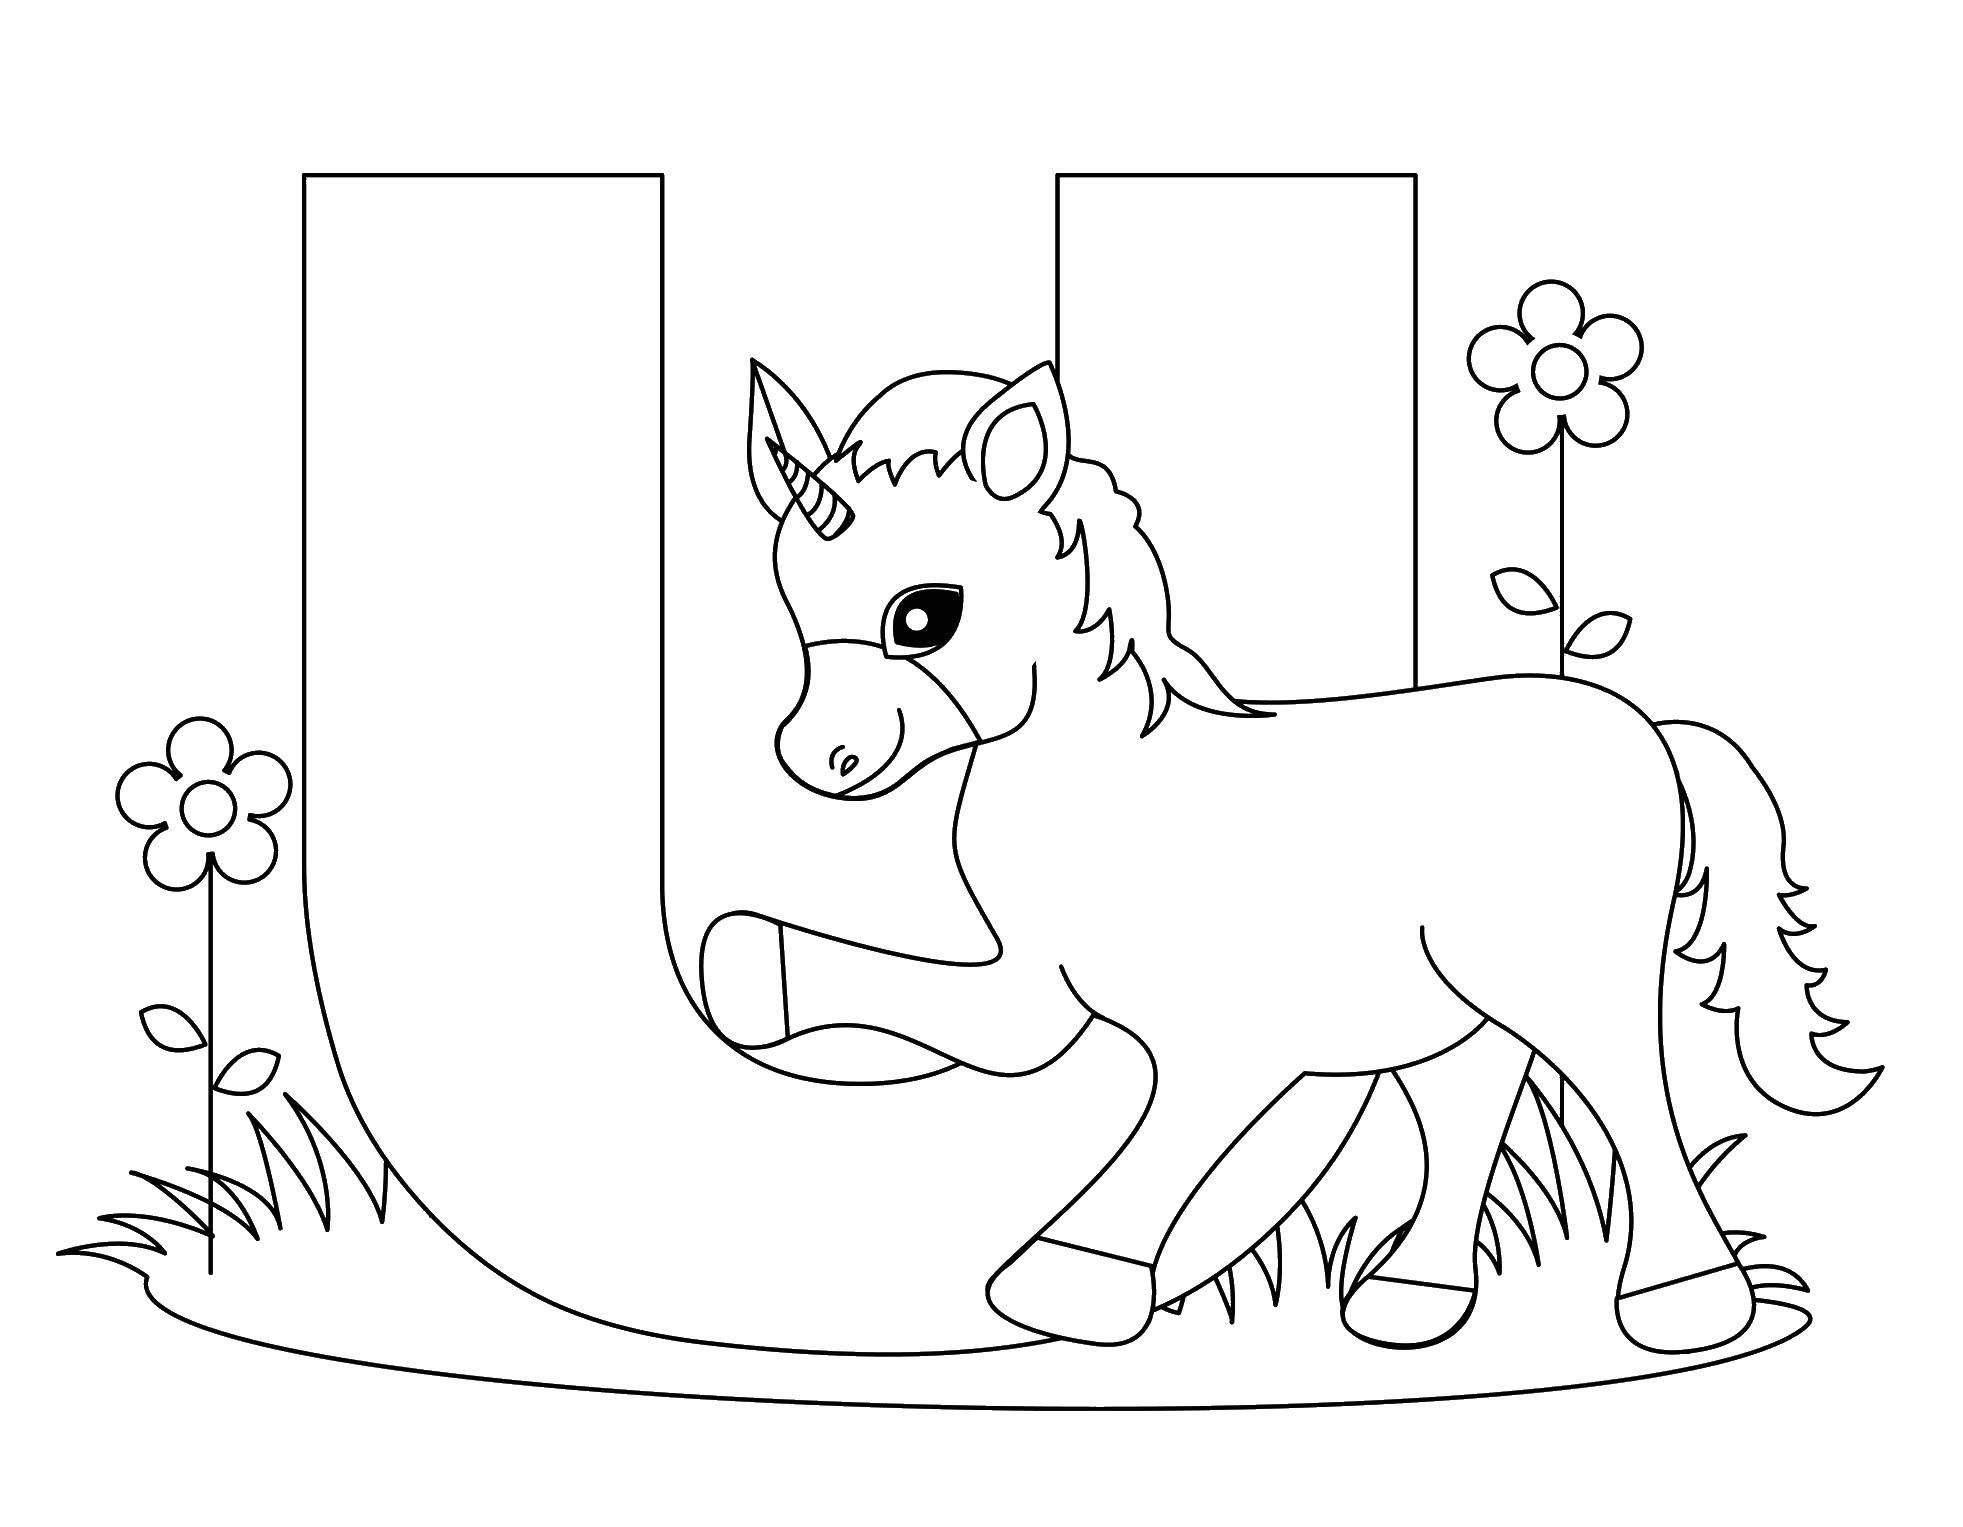 Coloring English alphabet with animals. Category English alphabet. Tags:  The alphabet, letters.